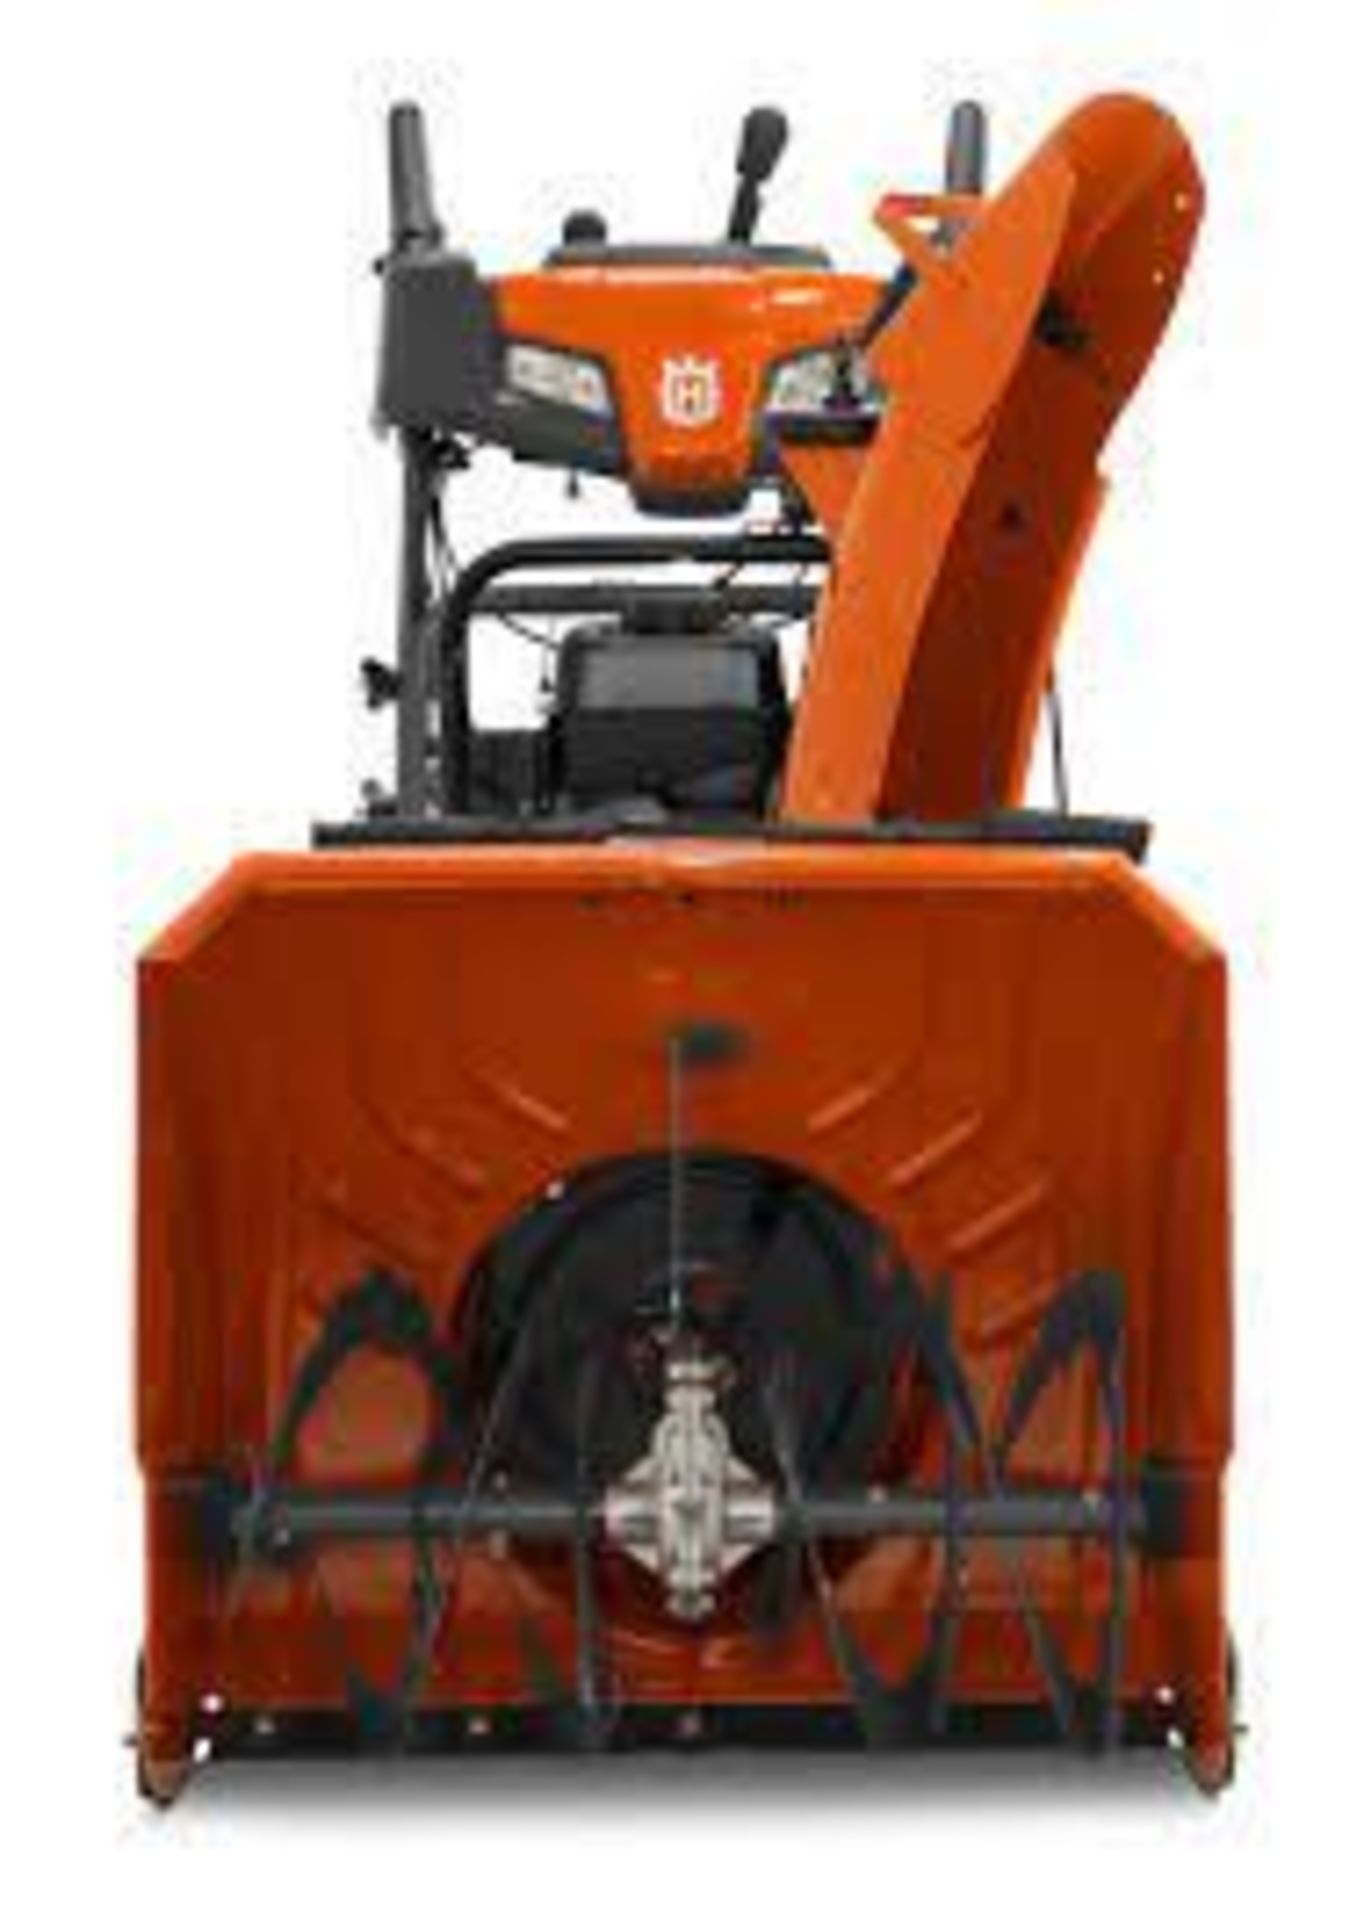 Husqvarna ST 424 Self Propelled Snow Blower - Approx. MSRP $2299 - Image 3 of 5